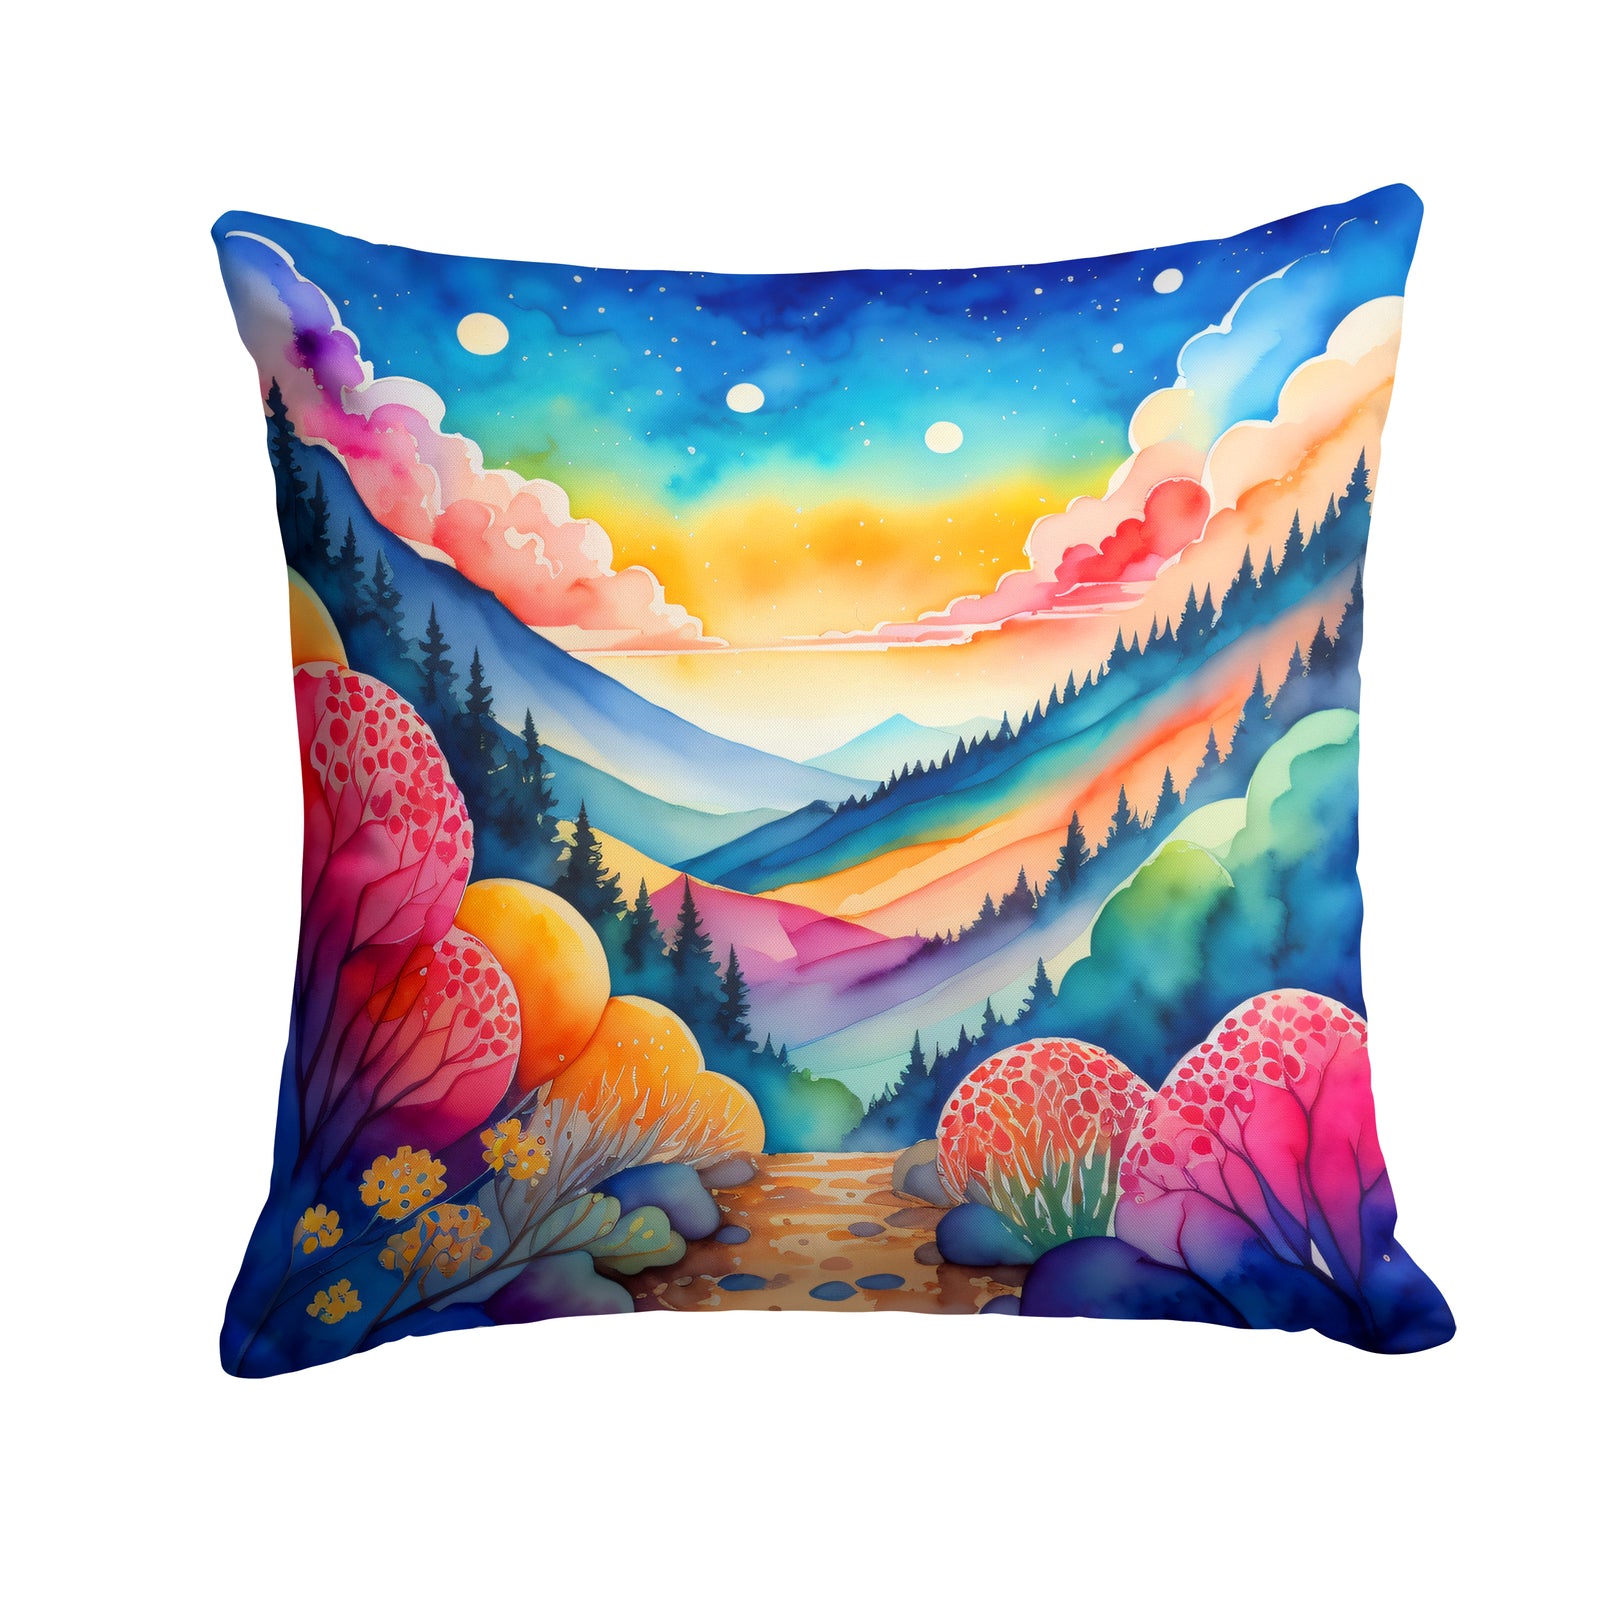 Buy this Colorful Brunia Fabric Decorative Pillow